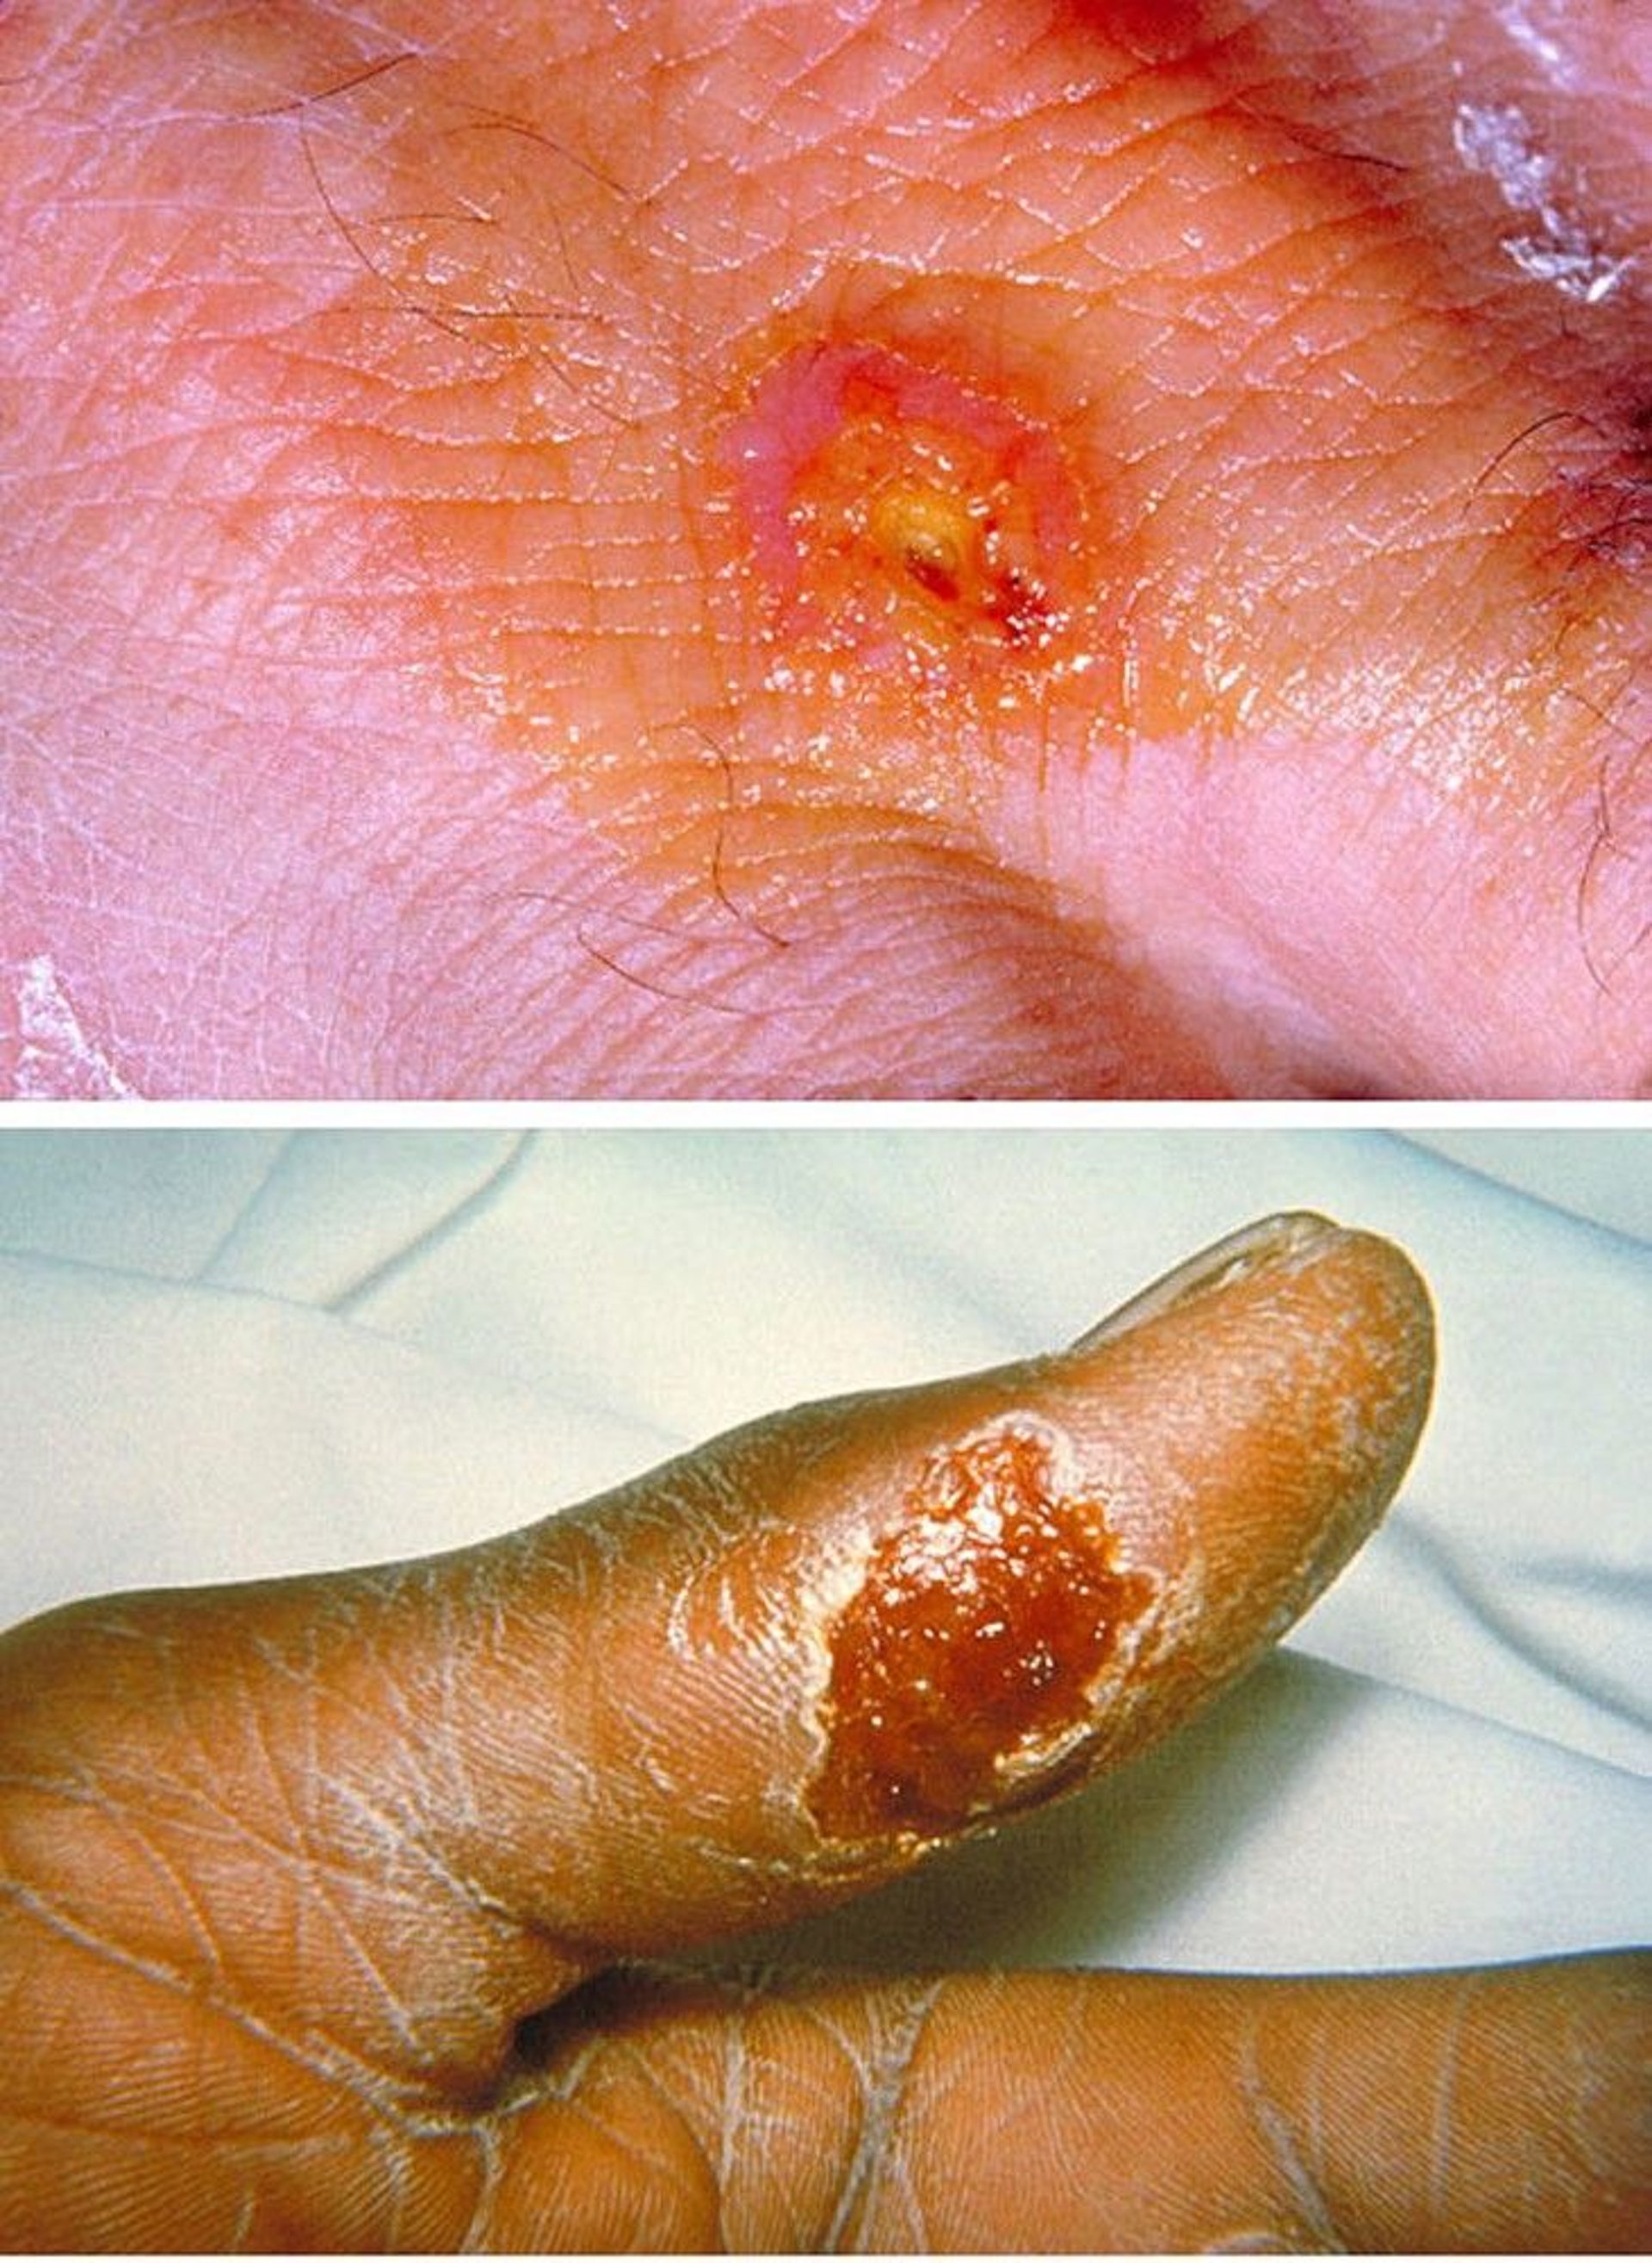 Skin Sores Caused by Tularemia